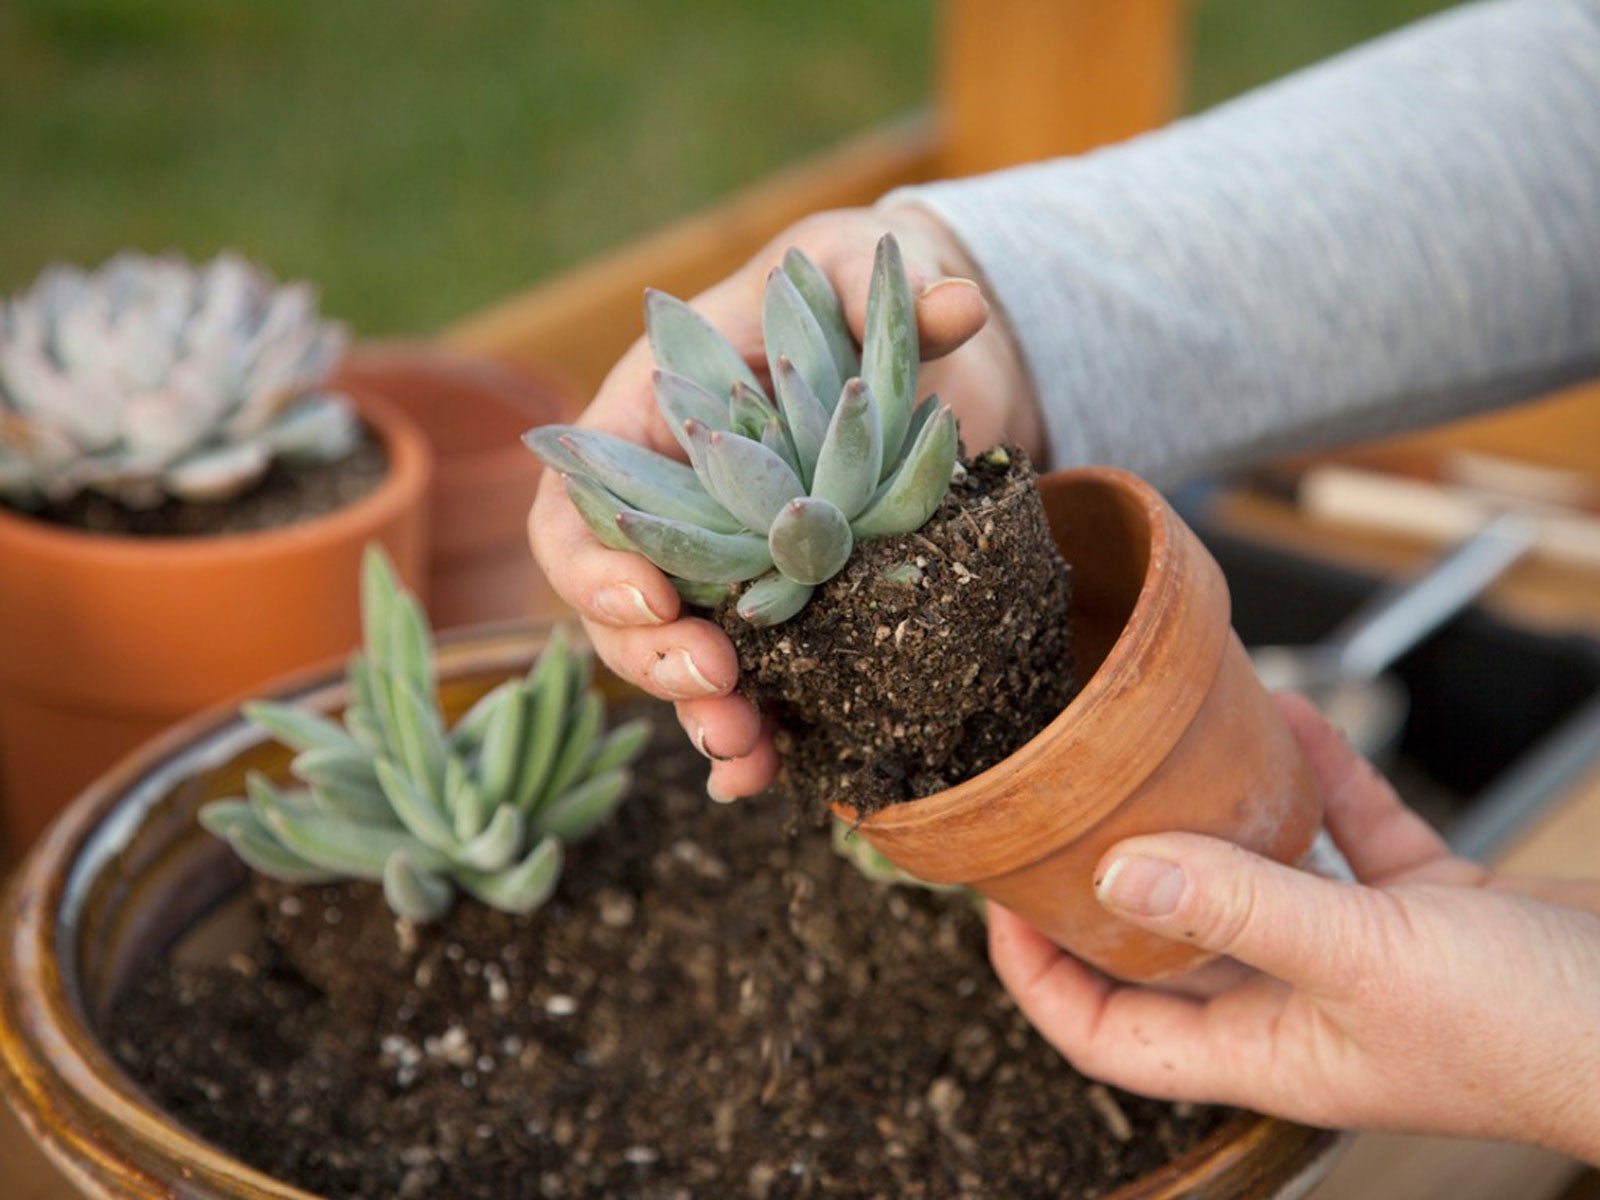 Beginner's Guide To Succulents Learn About Growing Succulent Plants